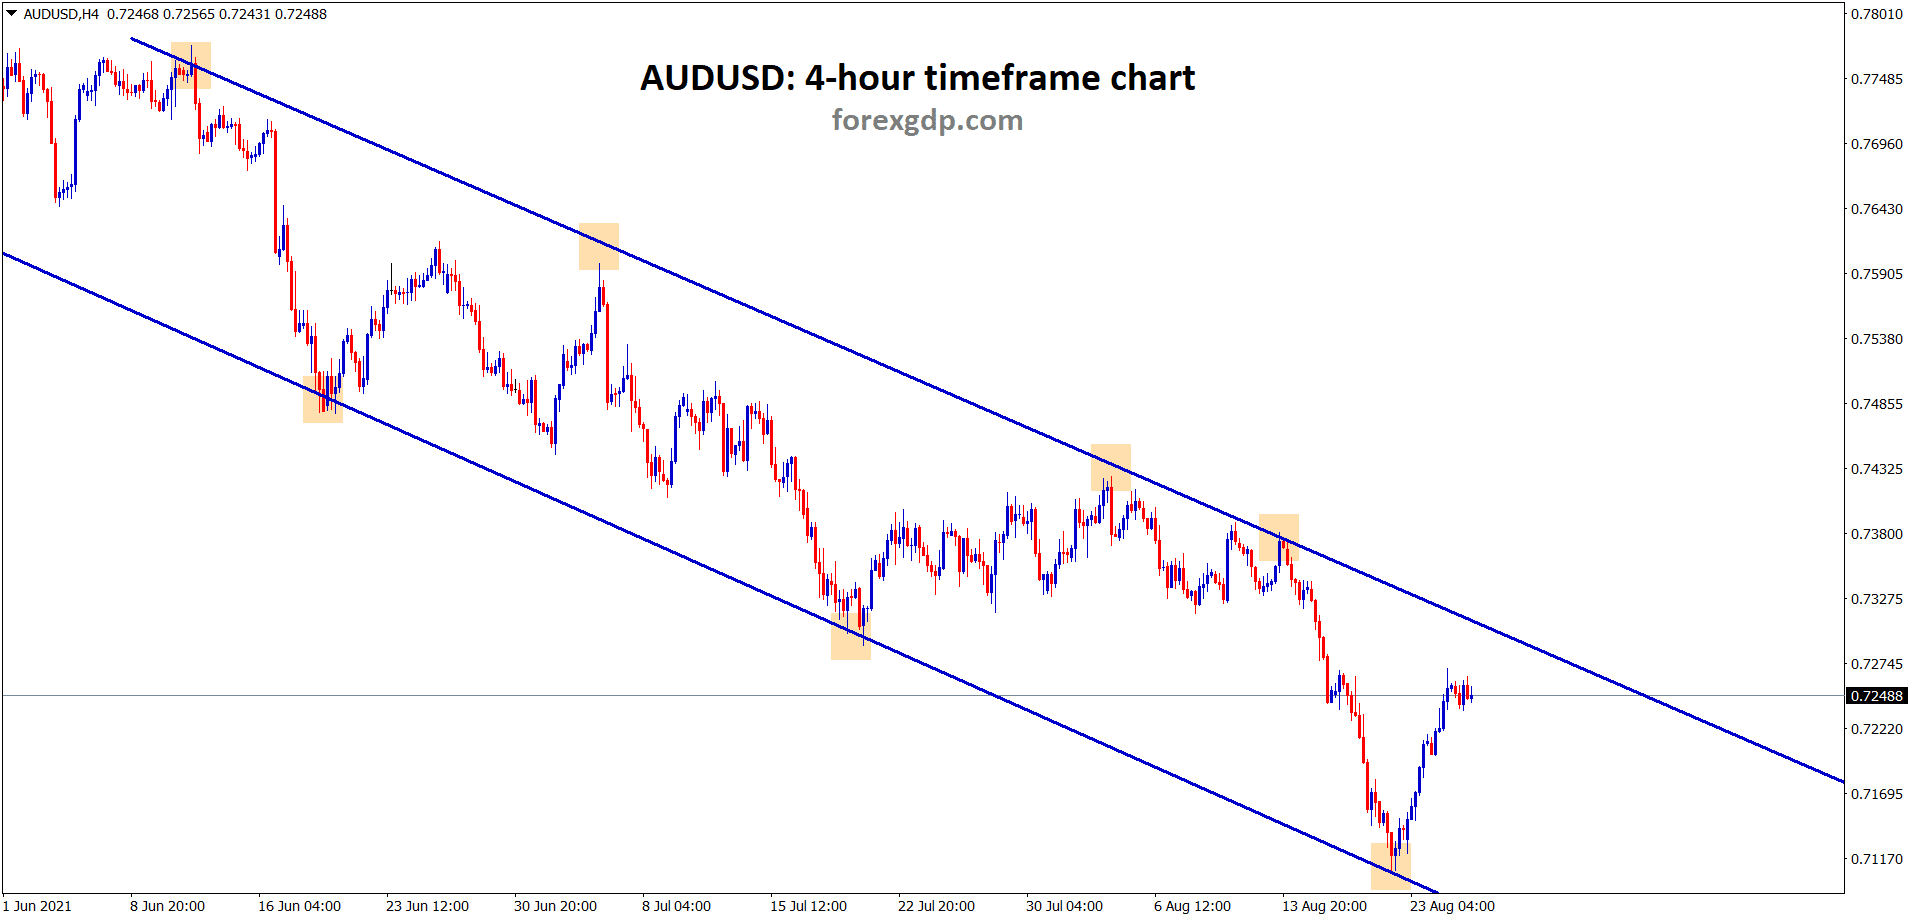 AUDUSD is moving in a clear descending channel range